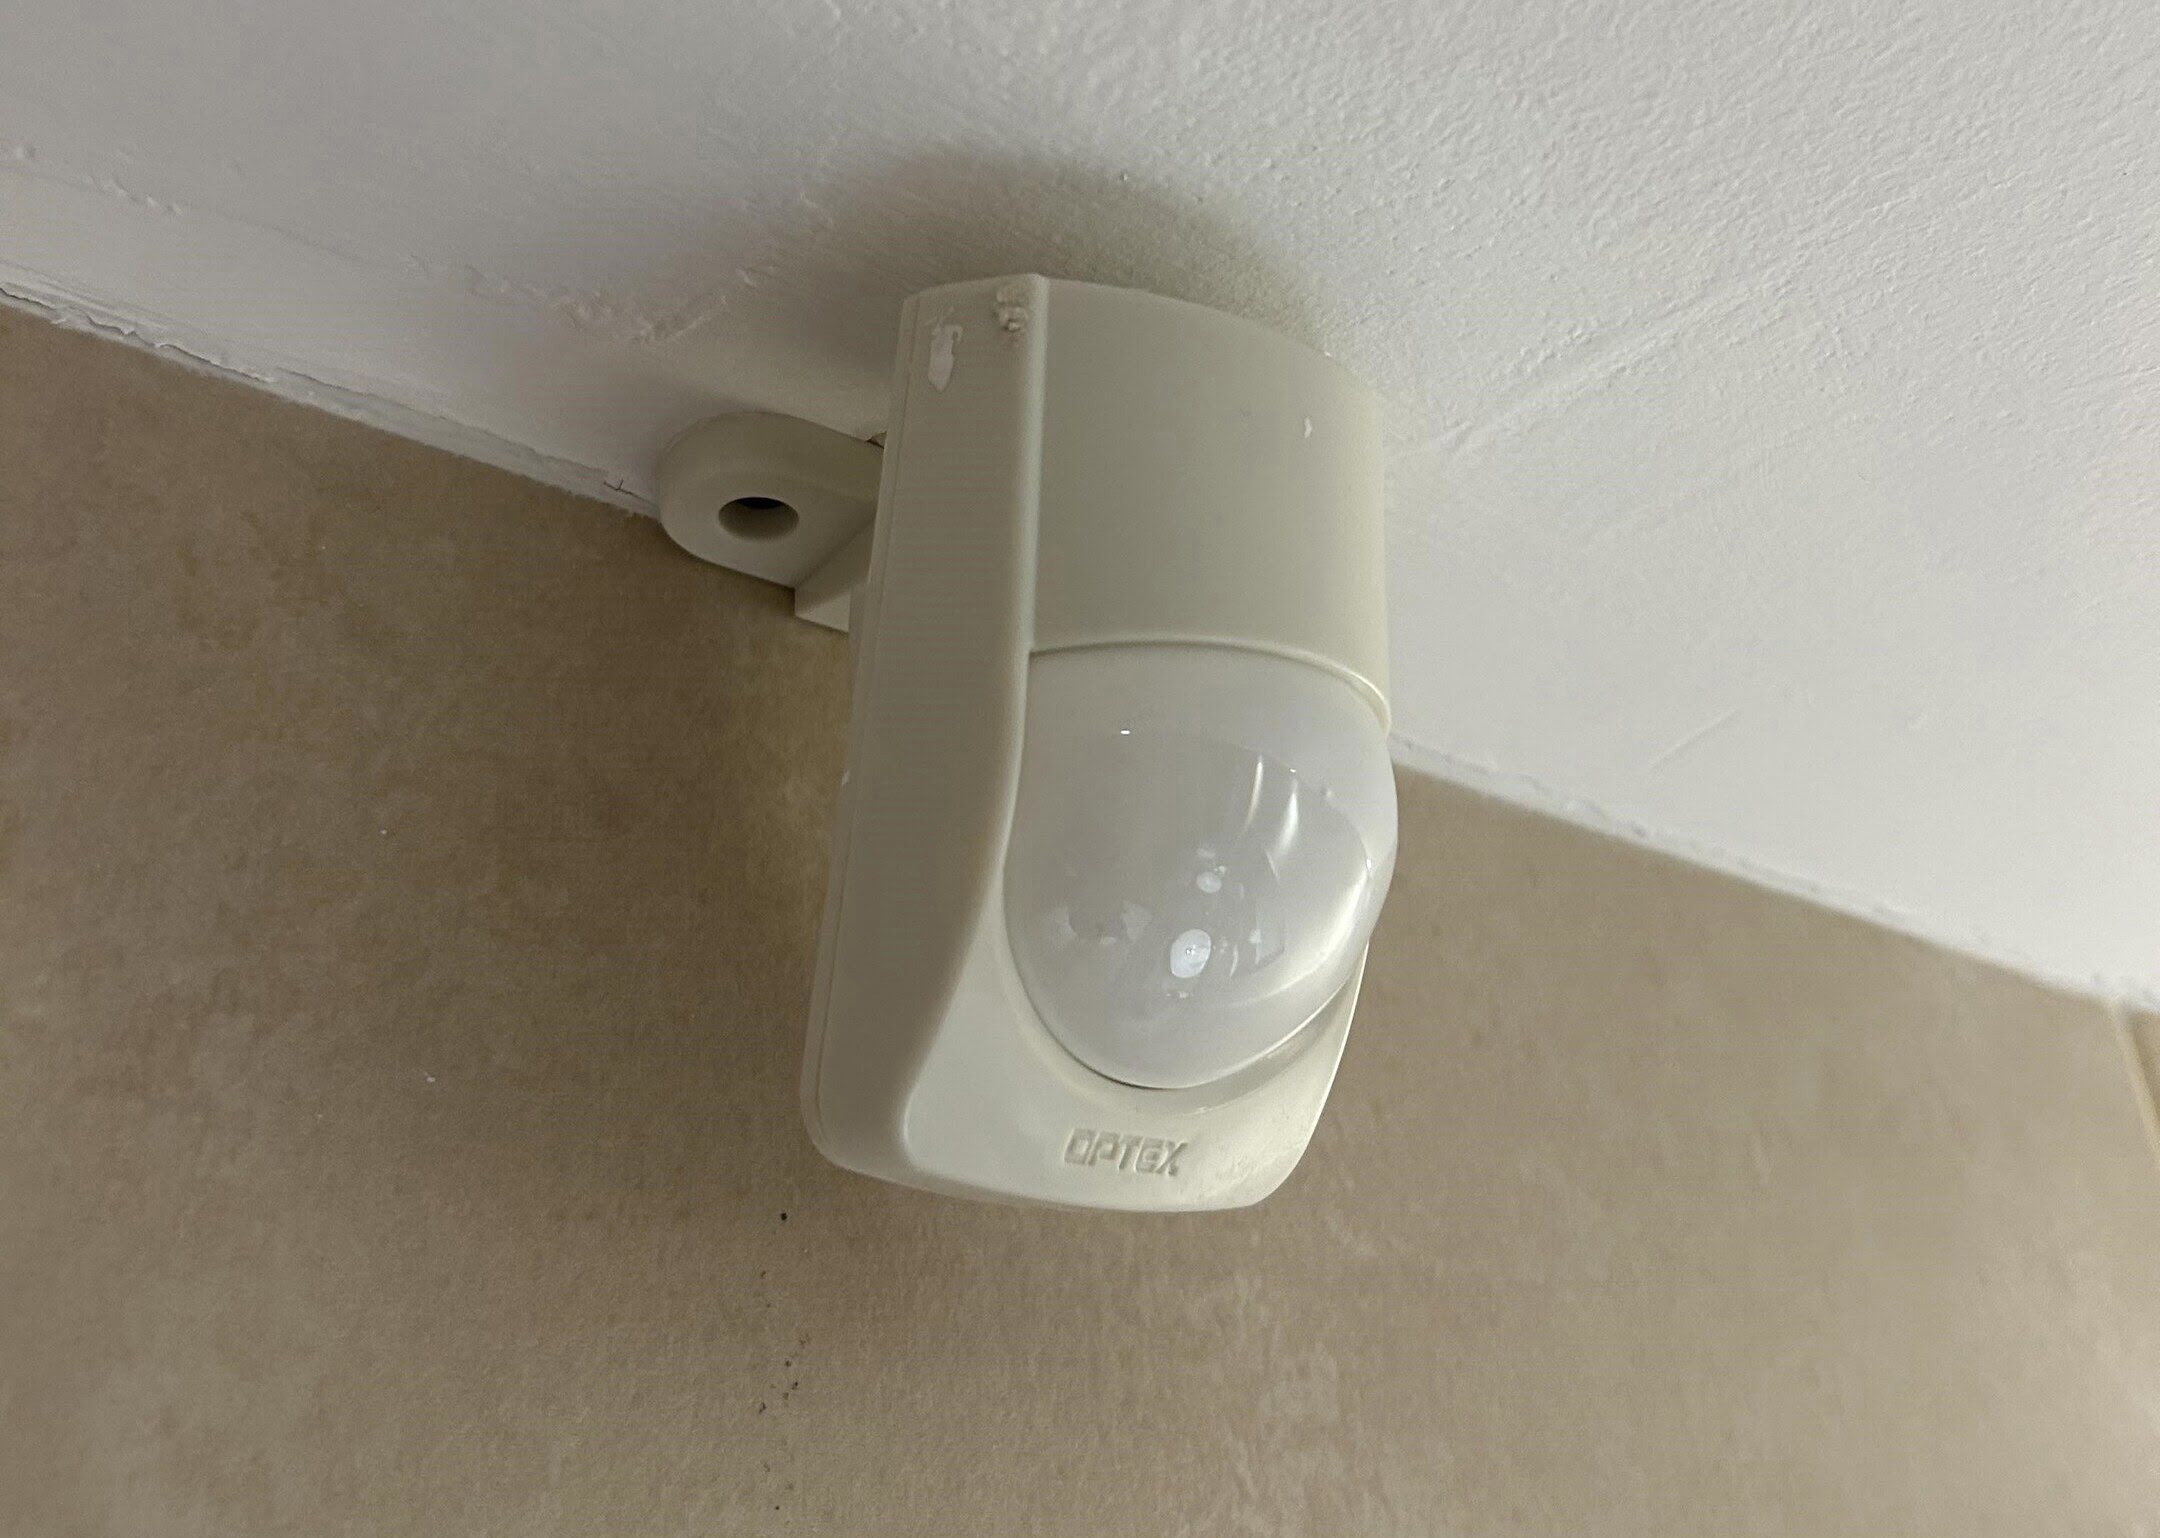 What Is The Purpose Of A Motion Detector In A Hotel Room